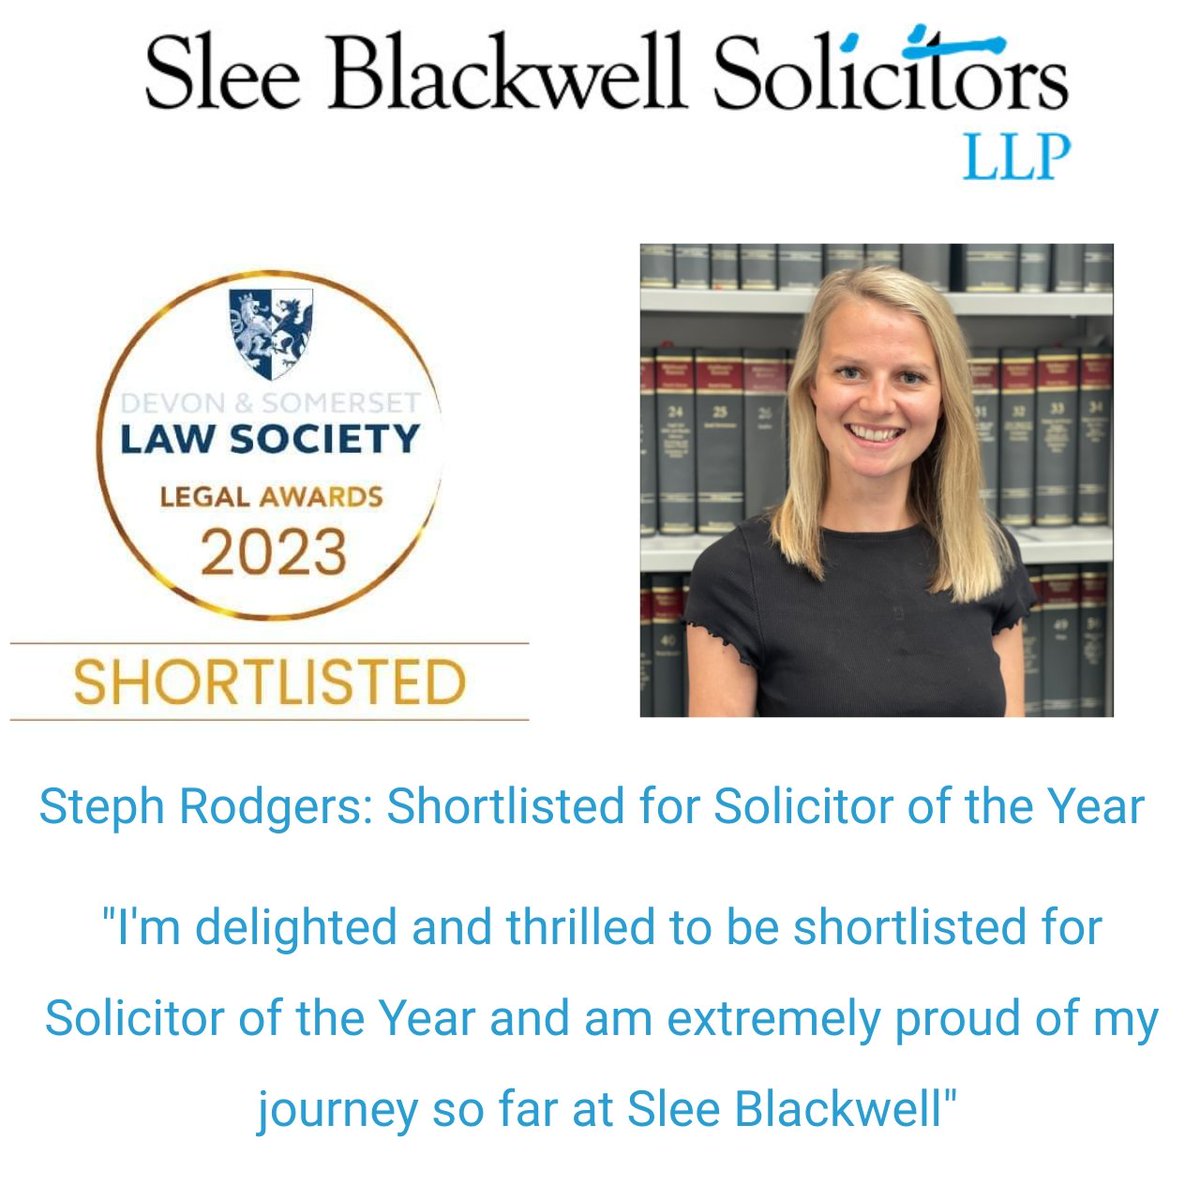 Steph Rodgers has been shortlisted for the Devon & Somerset Law Society Awards. Steph deals with estate administration, will drafting, powers of attorney, deputyship applications, deeds of variation & appointment & advising on tax & trusts law.
#awards
#shortlisted
#dasls